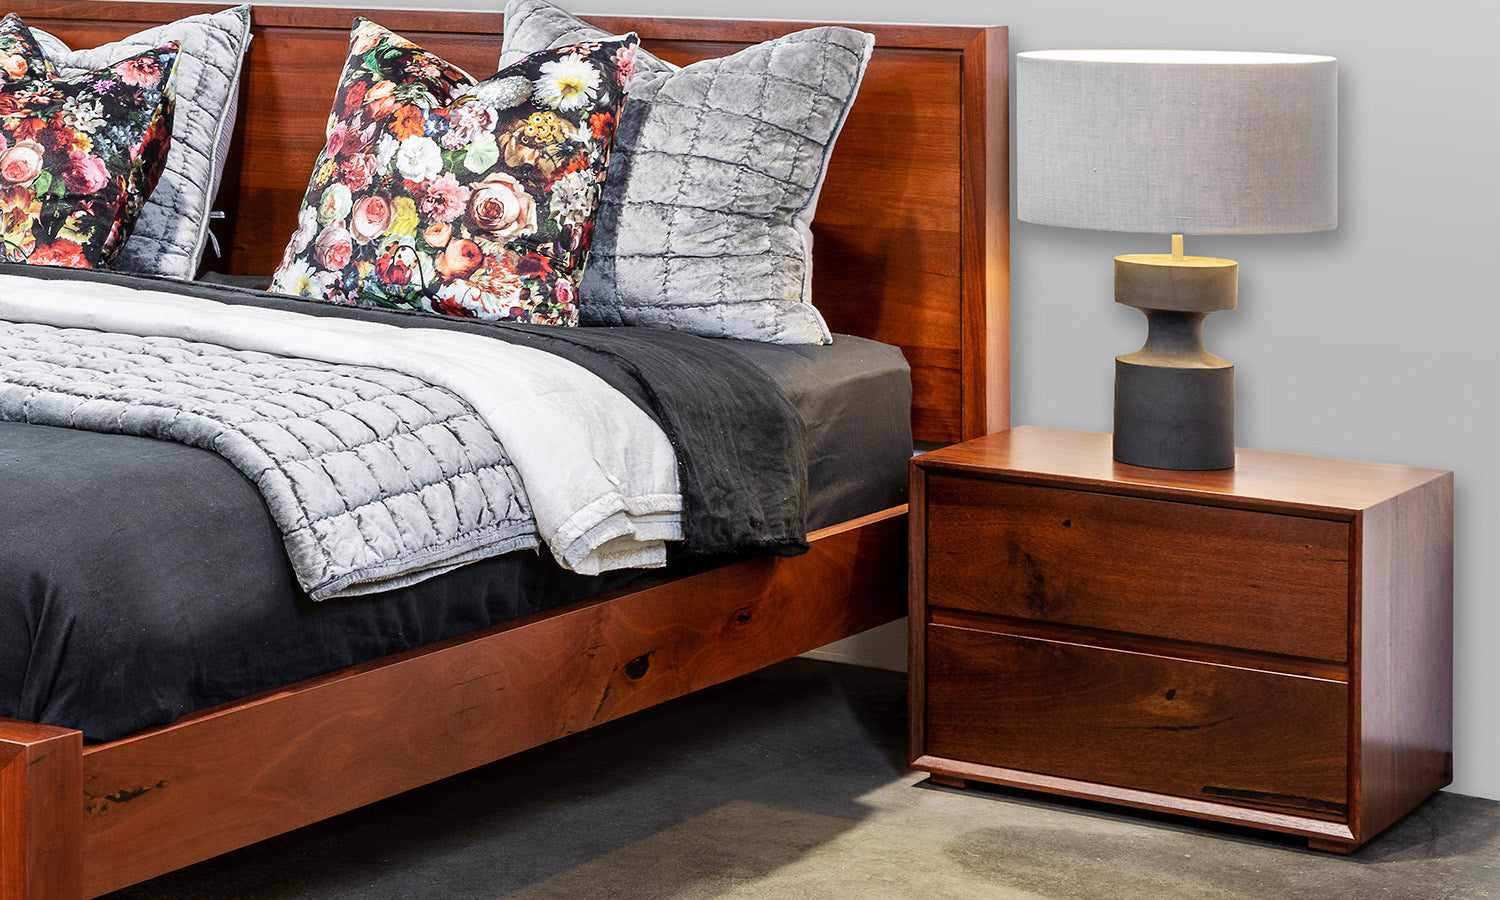 Apartment solid Marri or Jarrah Timber Wood bedside tables with two drawers or single drawer options, Perth WA